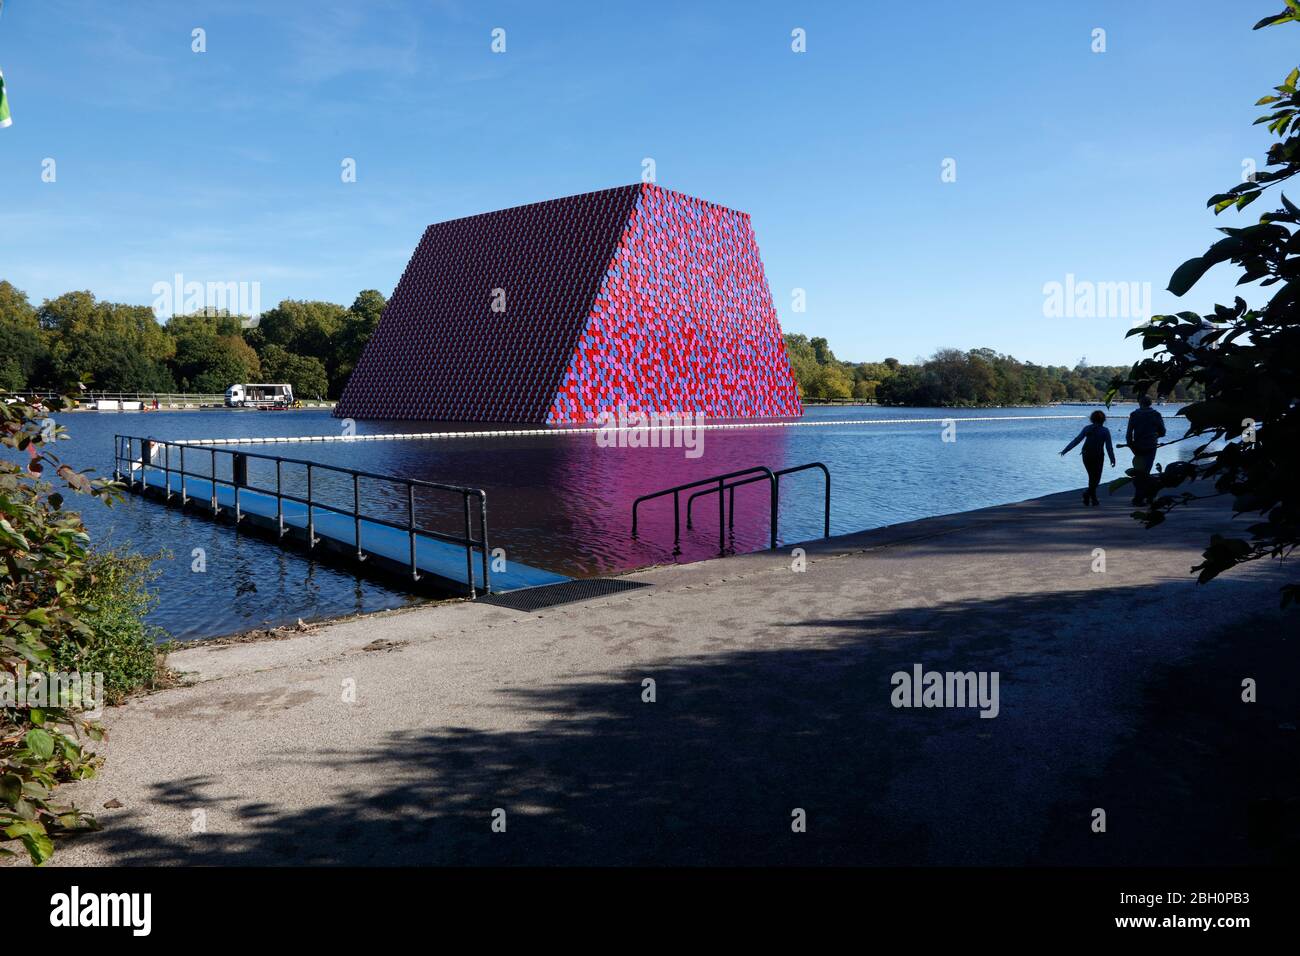 London Mastaba by Christo. Artwork of 7506 oil drums on the Serpentine, Hyde Park, London, UK Stock Photo